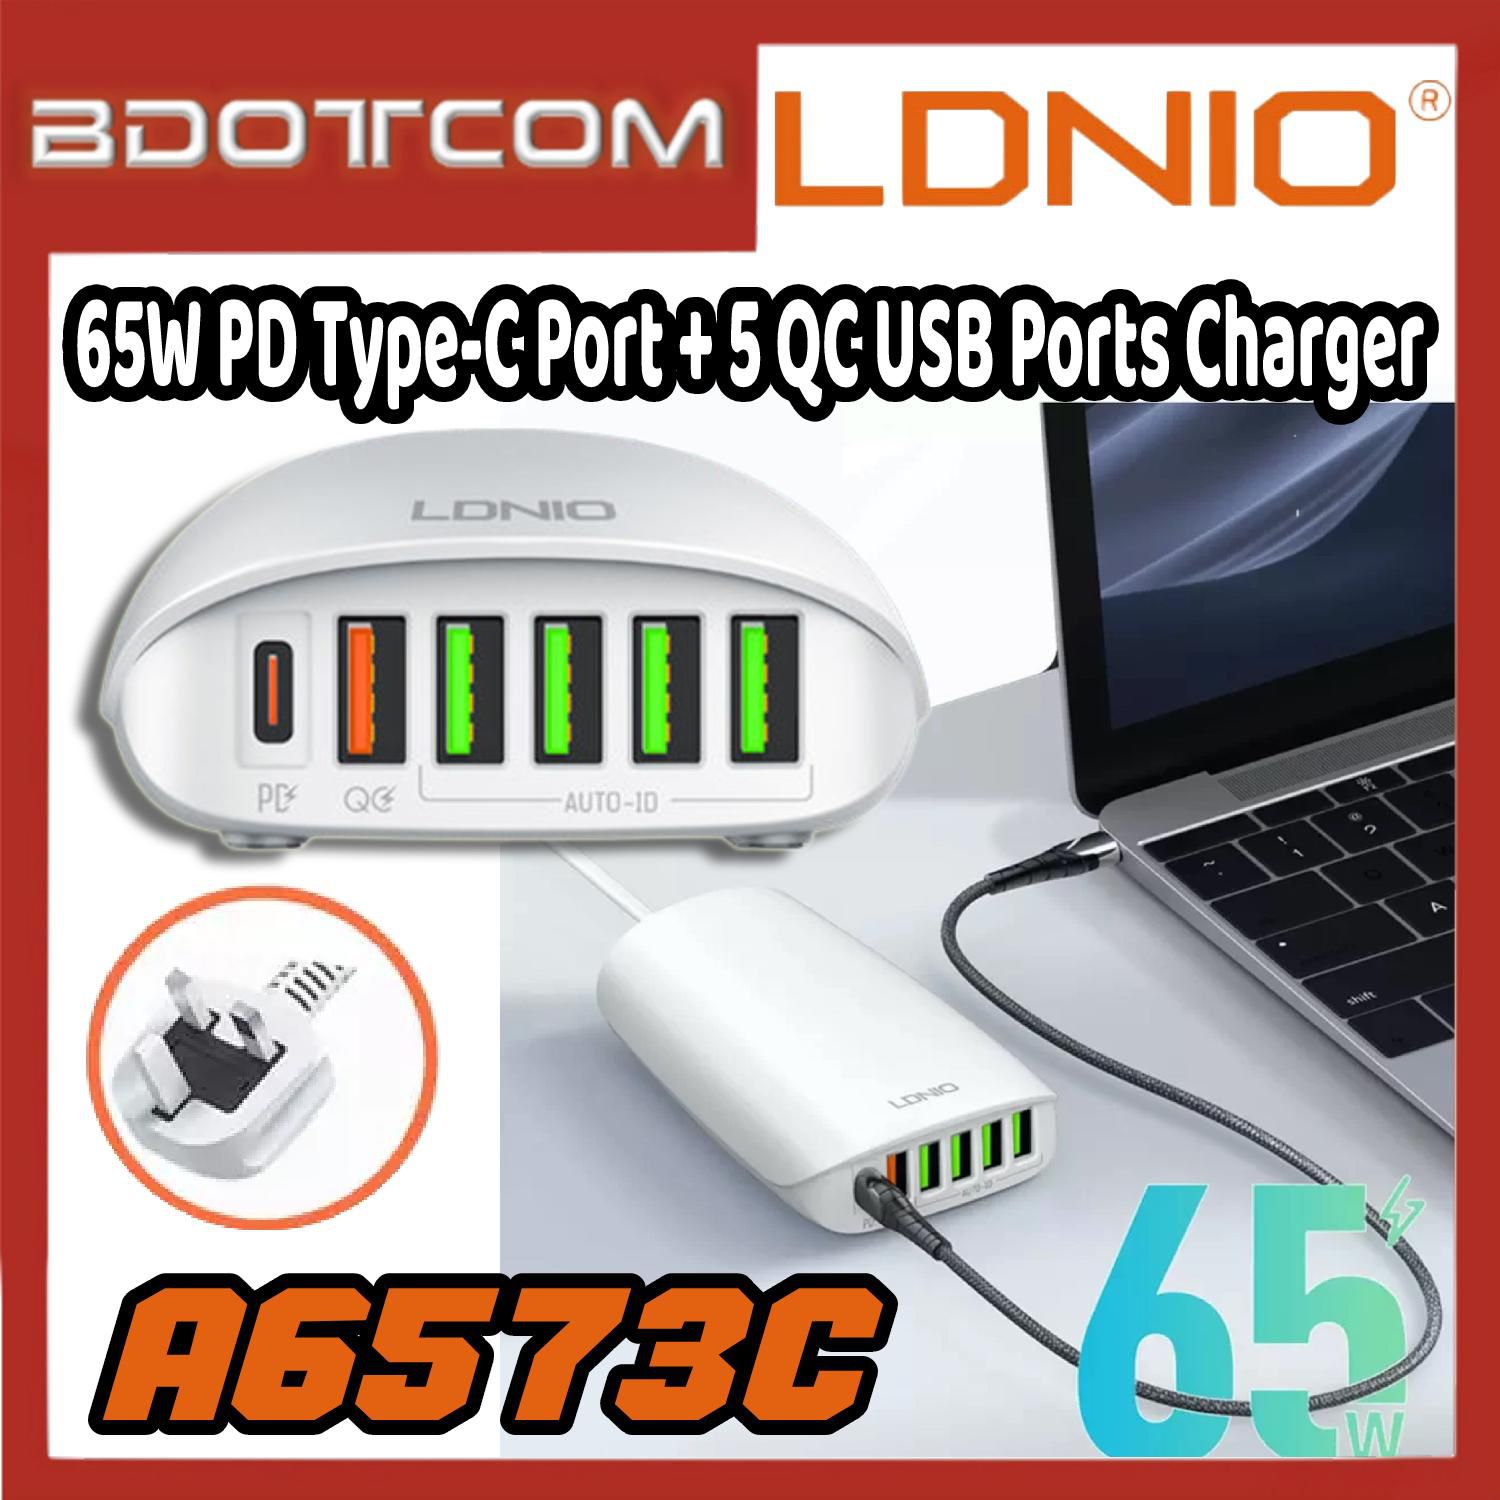 LDNIO A6573C 65W PD Type-C Port + 5 QC USB Ports Fast Charger